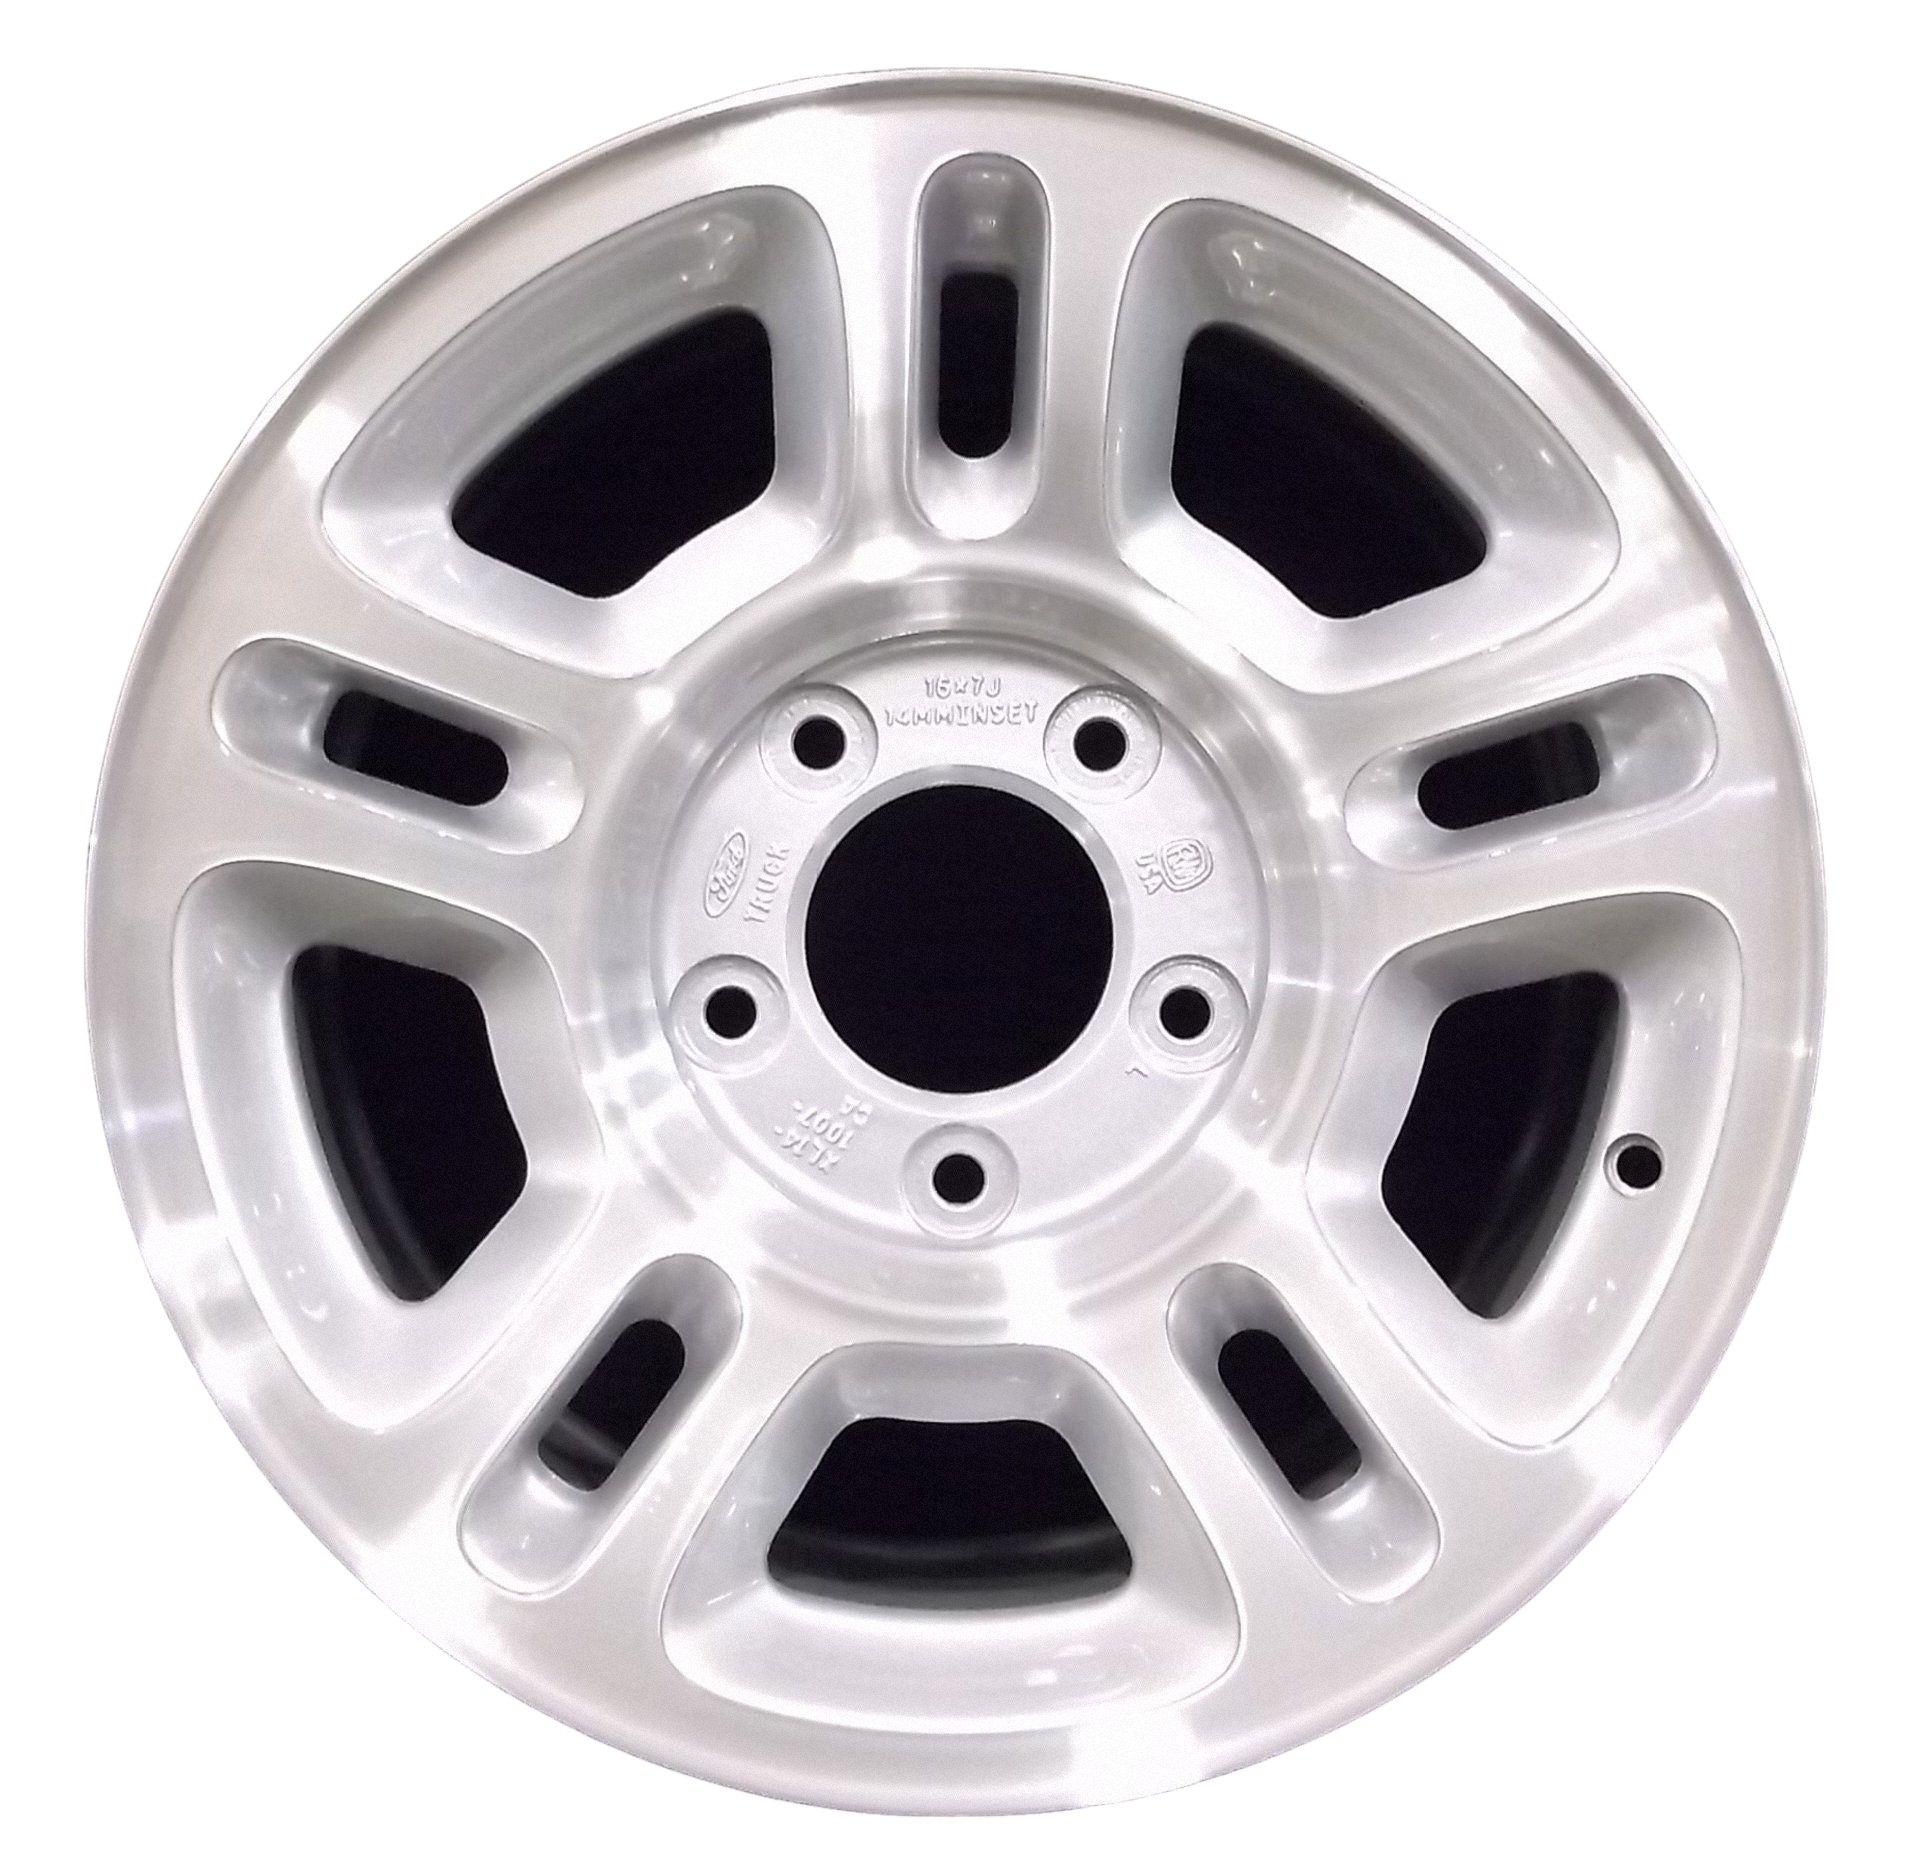 Ford Expedition  1999, 2000, 2001 Factory OEM Car Wheel Size 16x7 Alloy WAO.3327.PS02.MA